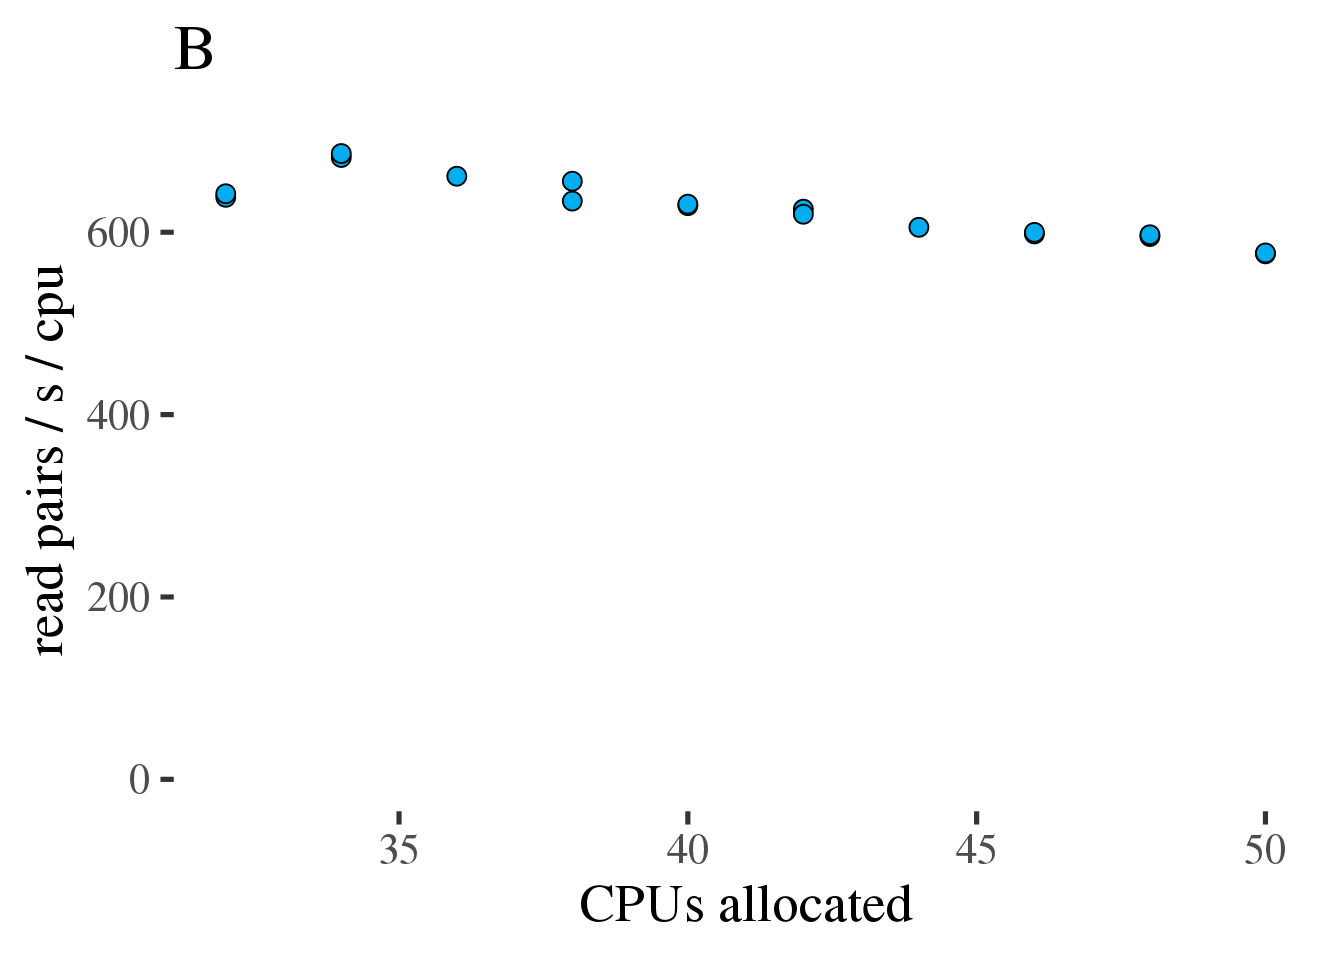 (A) Gross throughput in reads/s of the combined preprocessing pipeline from FASTQ to alignments in a BAM file. The total thread count across all three tools. (B) Like the plot on the left but showing Reads/s/cpu, a measure of efficiency.